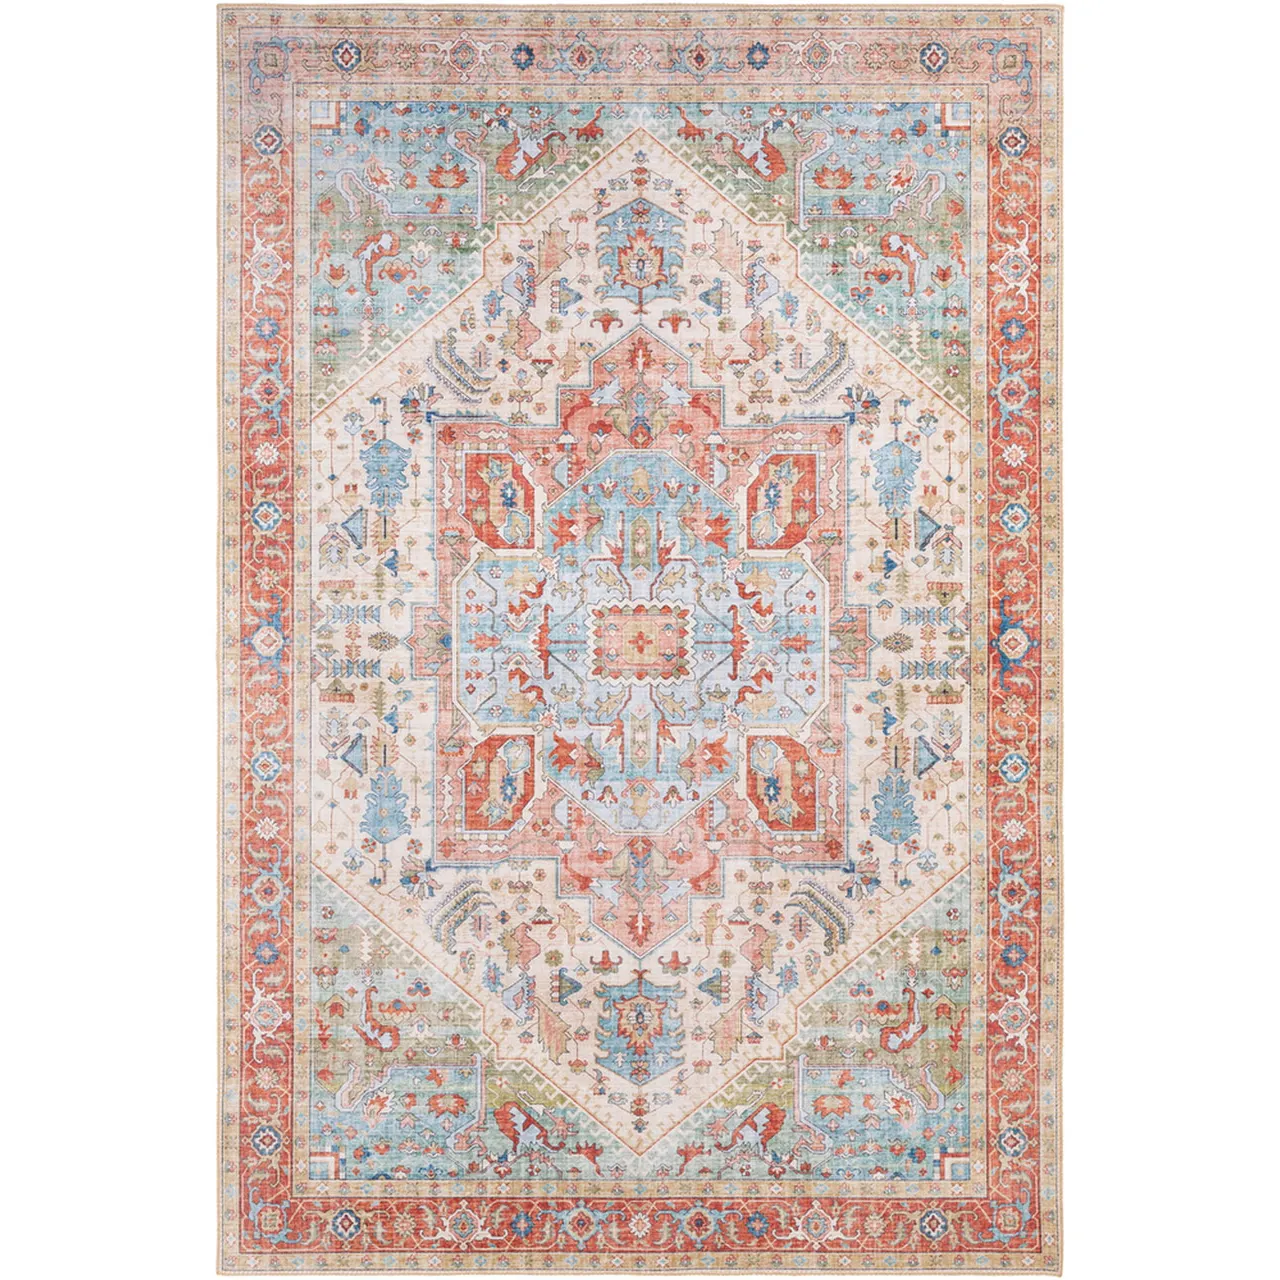 2022 New Arrivals Amazon Hot Sale Pretty Rugs Designer Home Decoration Carpet Printed Rugs Living Room Dhurrie Rugs 5X7ft